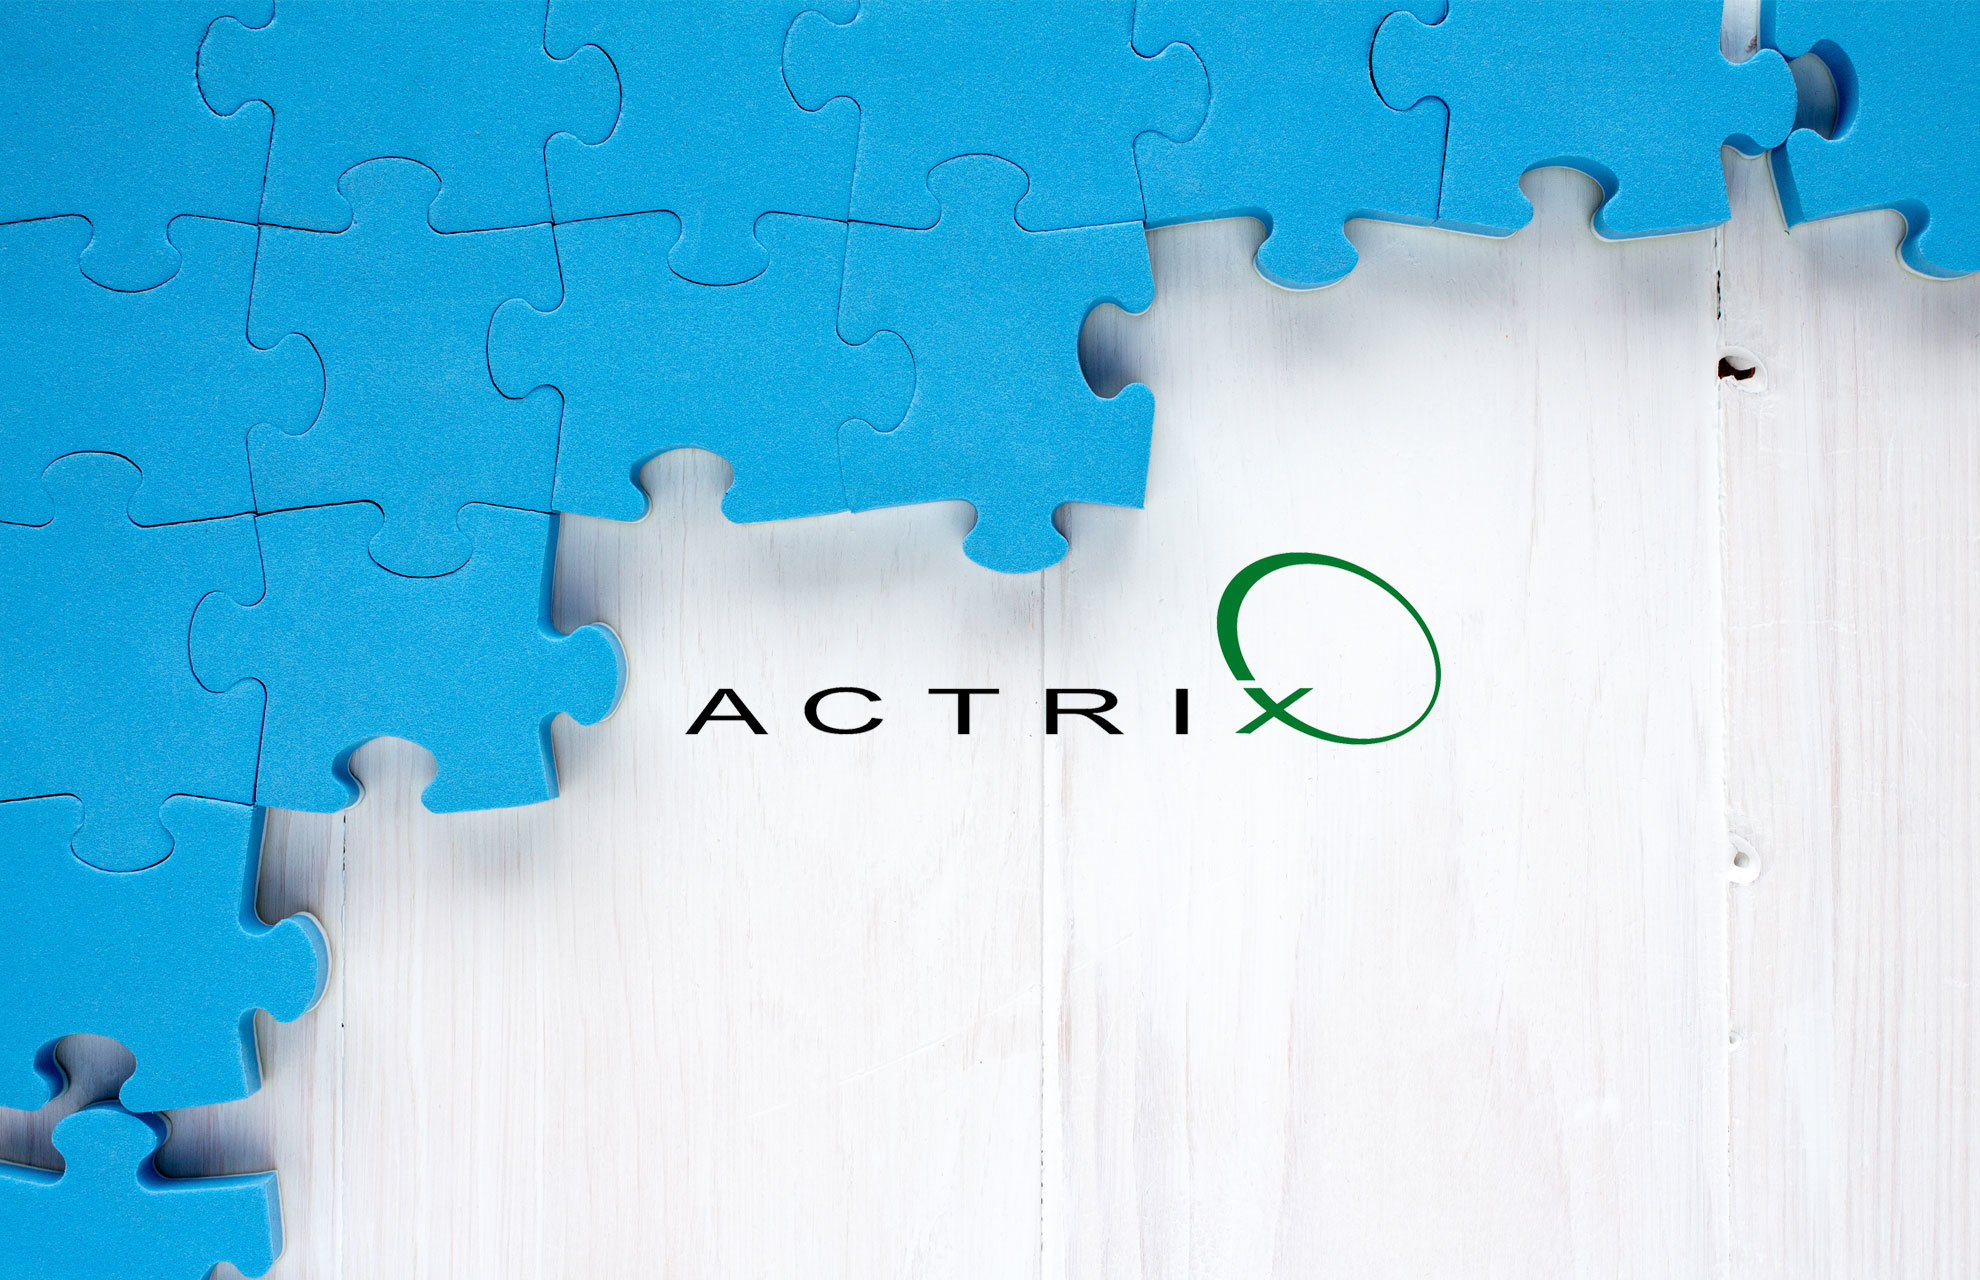 Actrix bought by Voyager